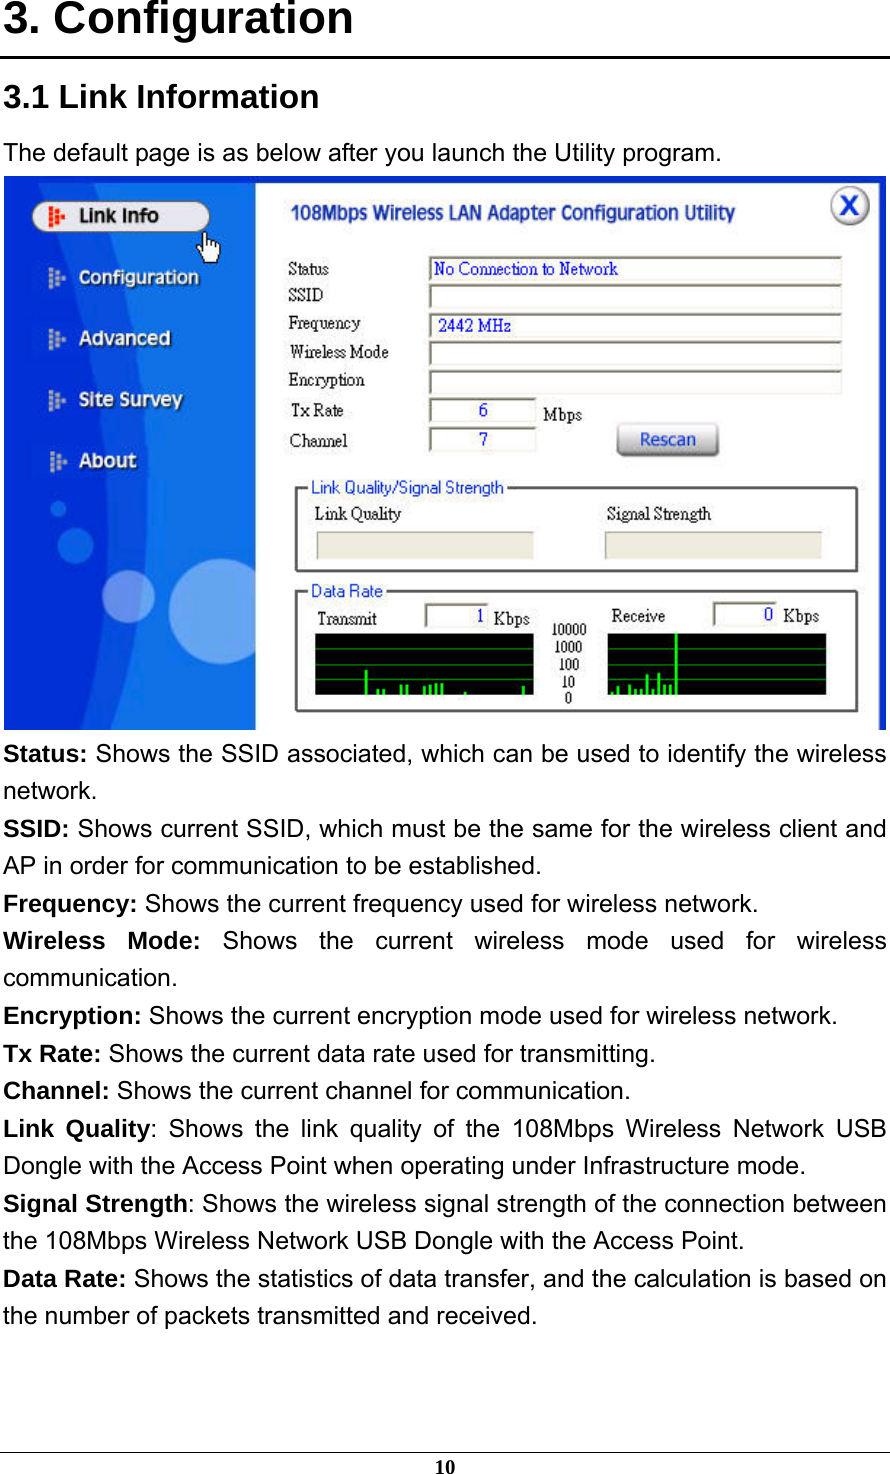  3. Configuration 3.1 Link Information The default page is as below after you launch the Utility program.  Status: Shows the SSID associated, which can be used to identify the wireless network. SSID: Shows current SSID, which must be the same for the wireless client and AP in order for communication to be established. Frequency: Shows the current frequency used for wireless network. Wireless Mode: Shows the current wireless mode used for wireless communication. Encryption: Shows the current encryption mode used for wireless network. Tx Rate: Shows the current data rate used for transmitting. Channel: Shows the current channel for communication. Link Quality: Shows the link quality of the 108Mbps Wireless Network USB Dongle with the Access Point when operating under Infrastructure mode. Signal Strength: Shows the wireless signal strength of the connection between the 108Mbps Wireless Network USB Dongle with the Access Point. Data Rate: Shows the statistics of data transfer, and the calculation is based on the number of packets transmitted and received. 10 